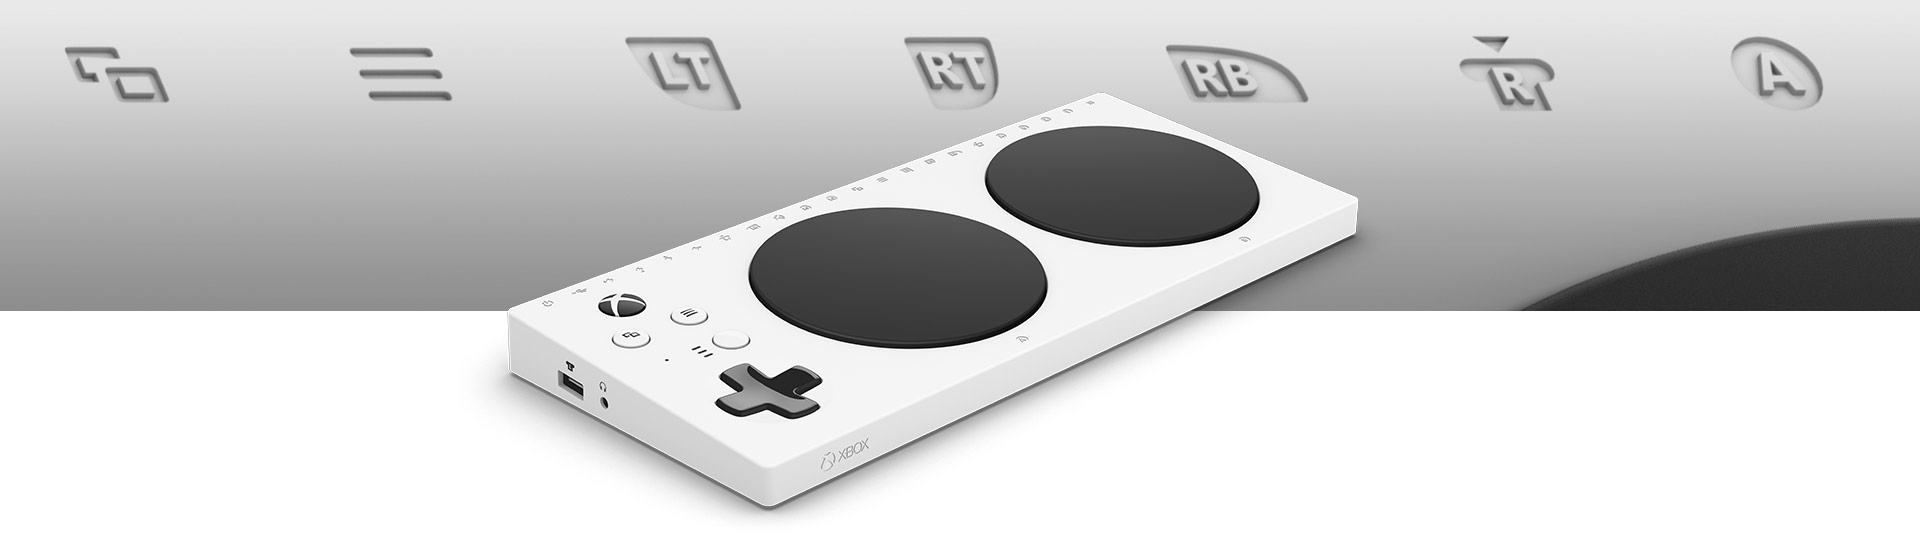 Side view of the Xbox Adaptive Controller and the ports on the Controller